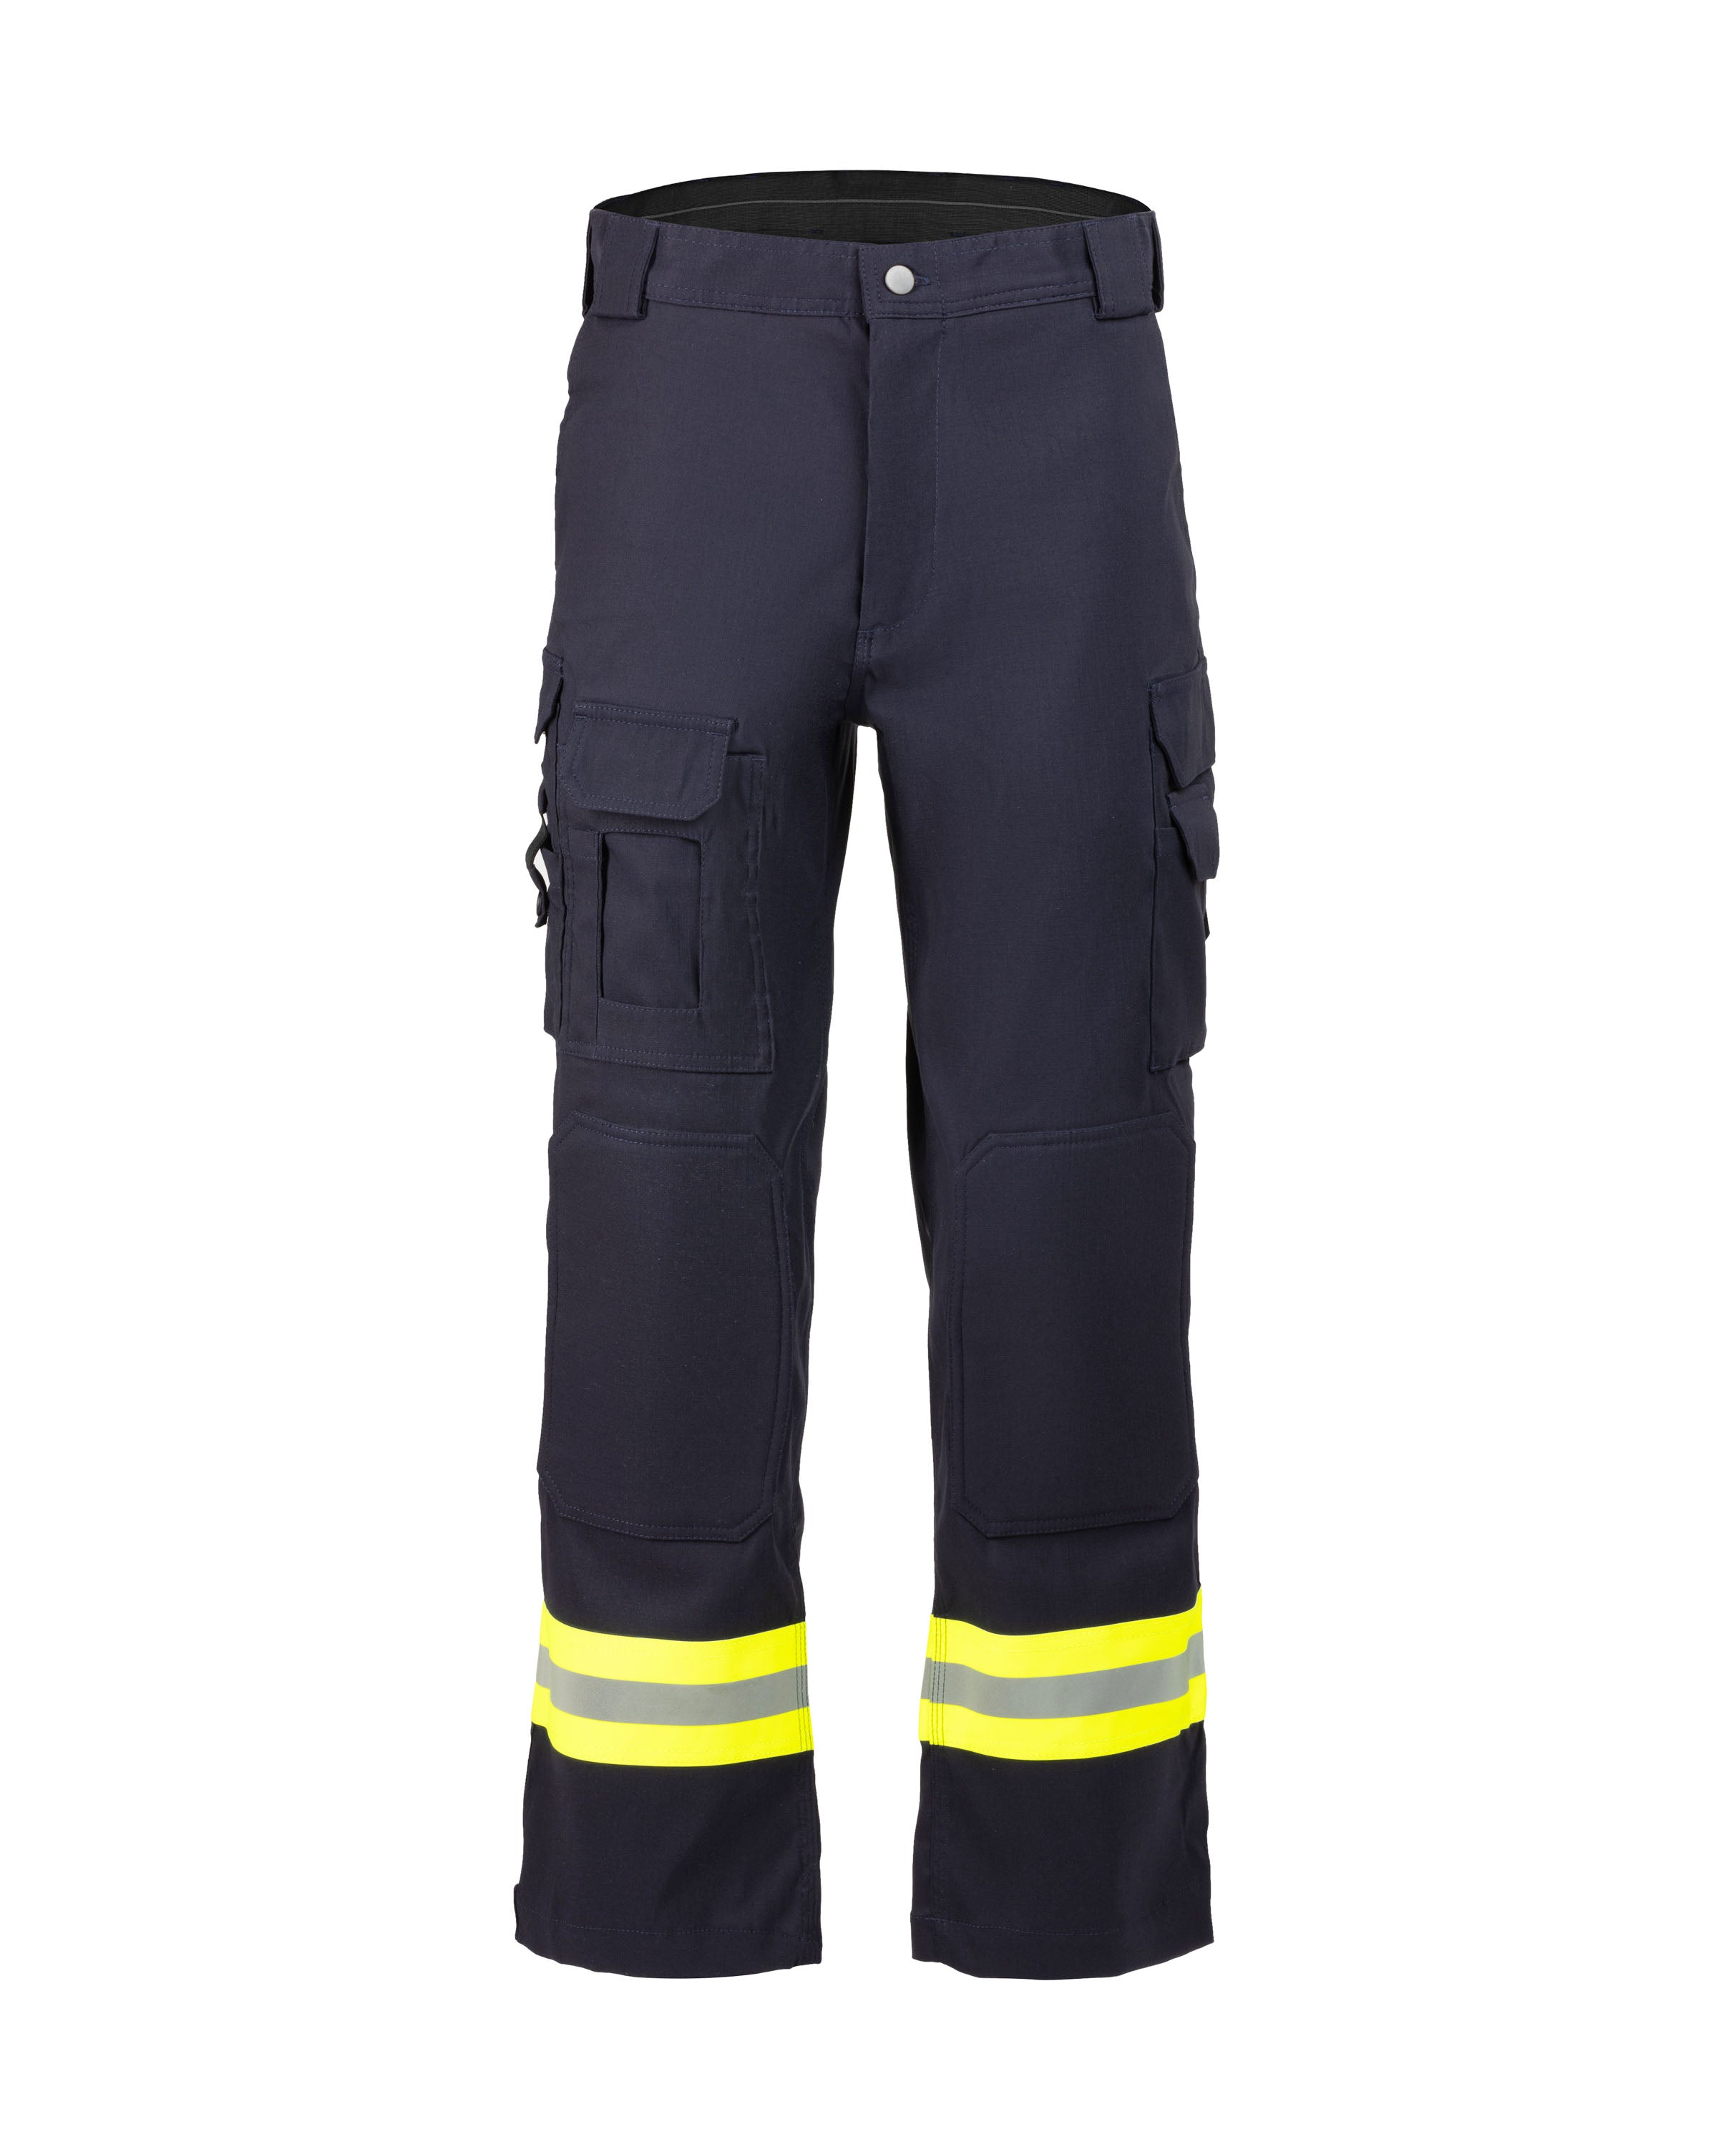 Lady's Emergency-Health trousers - 3004025